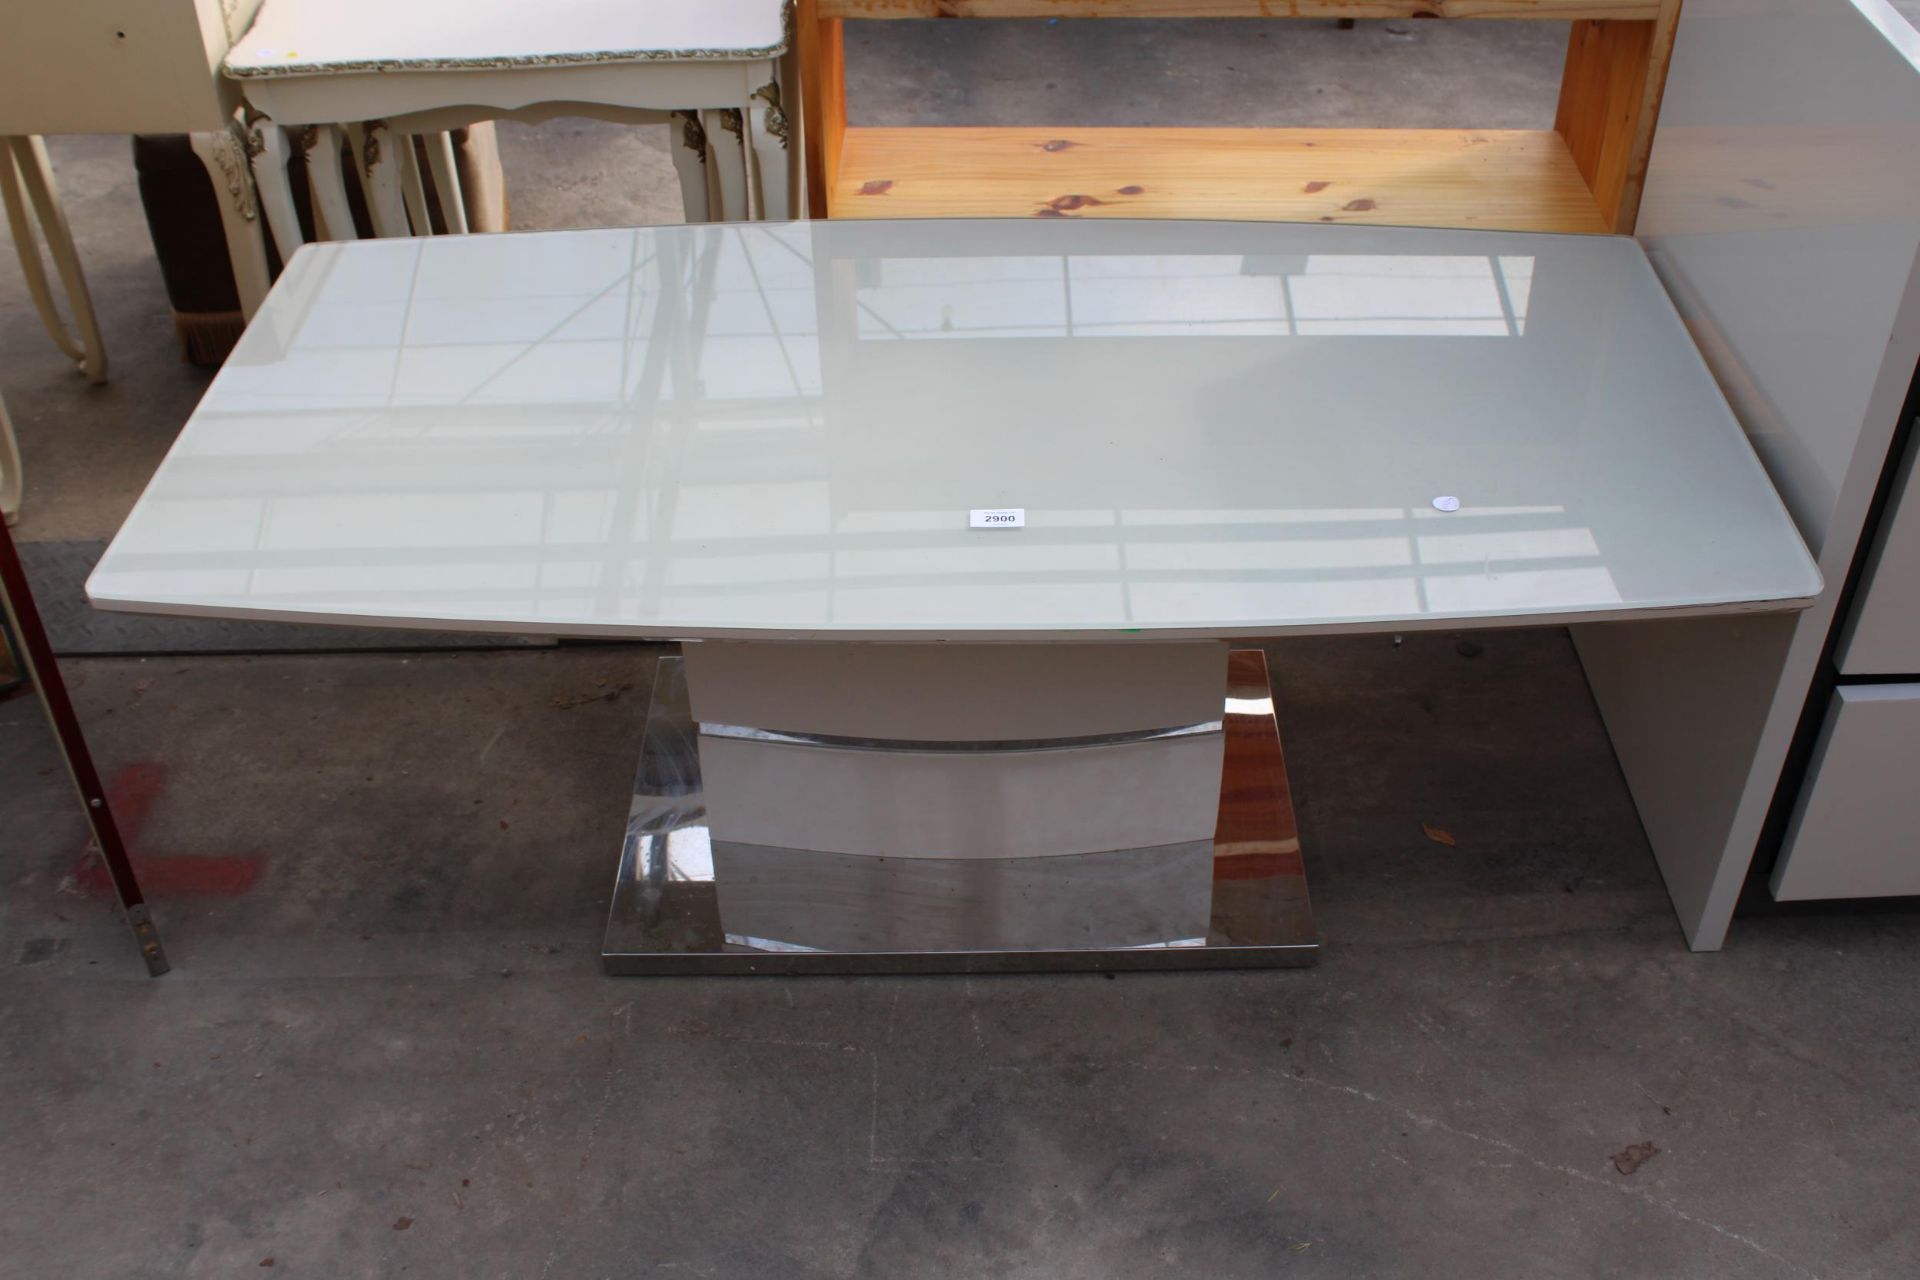 A MILAN STYLE COFFEE TABLE WITH GLASS TOP AND POLISHED CHROME BASE 47" X 24"